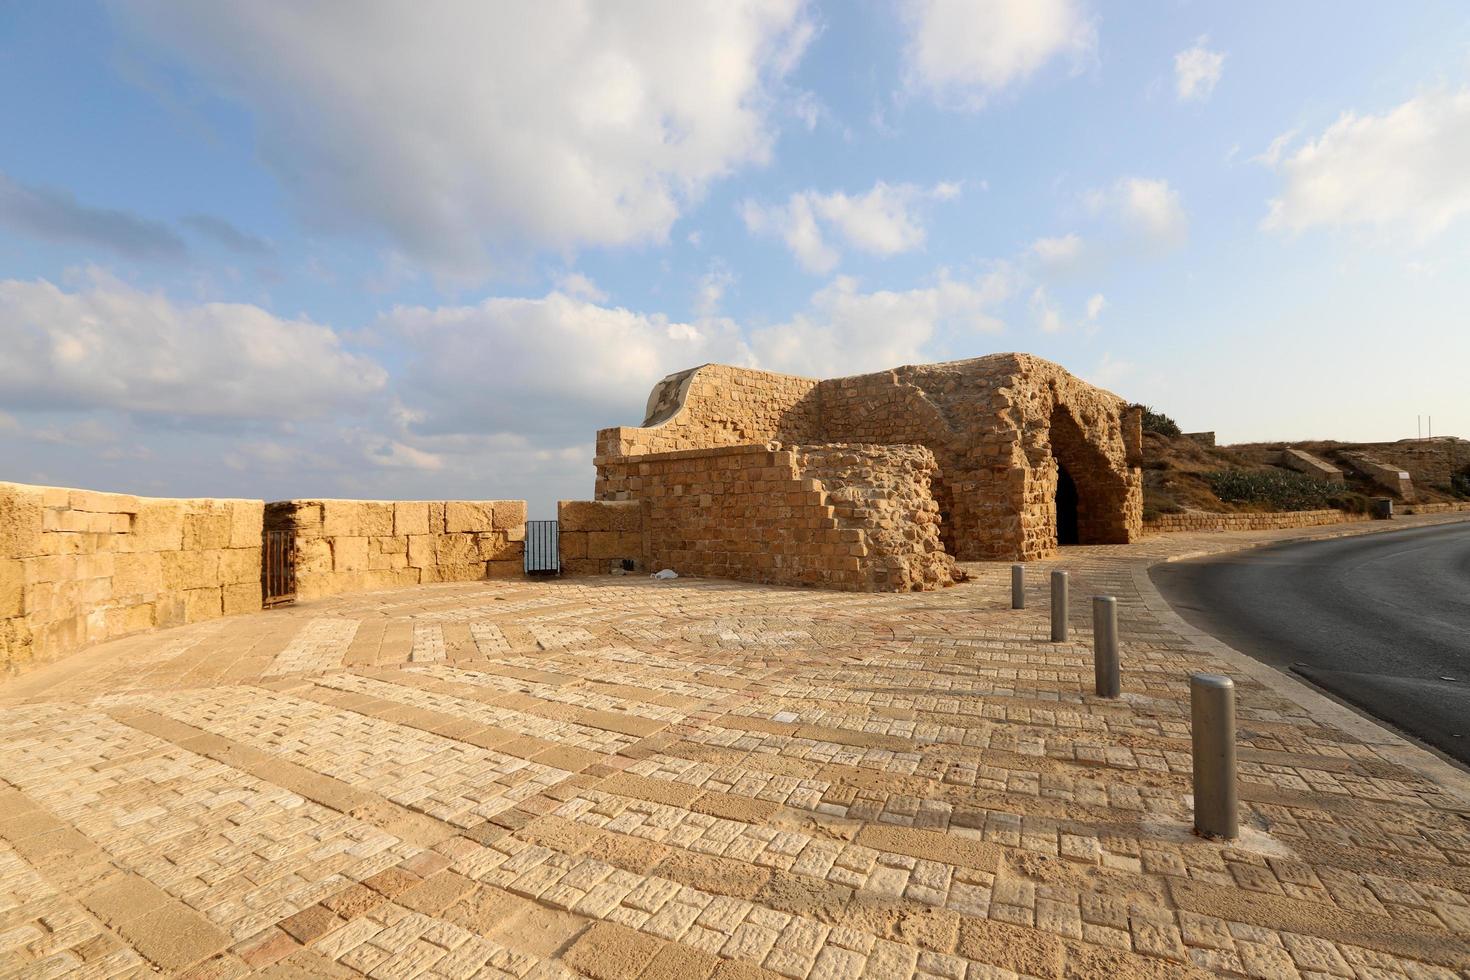 Acre Israel January 18, 2020. The ancient port city of Akko in northwestern Israel on the Mediterranean Sea. photo